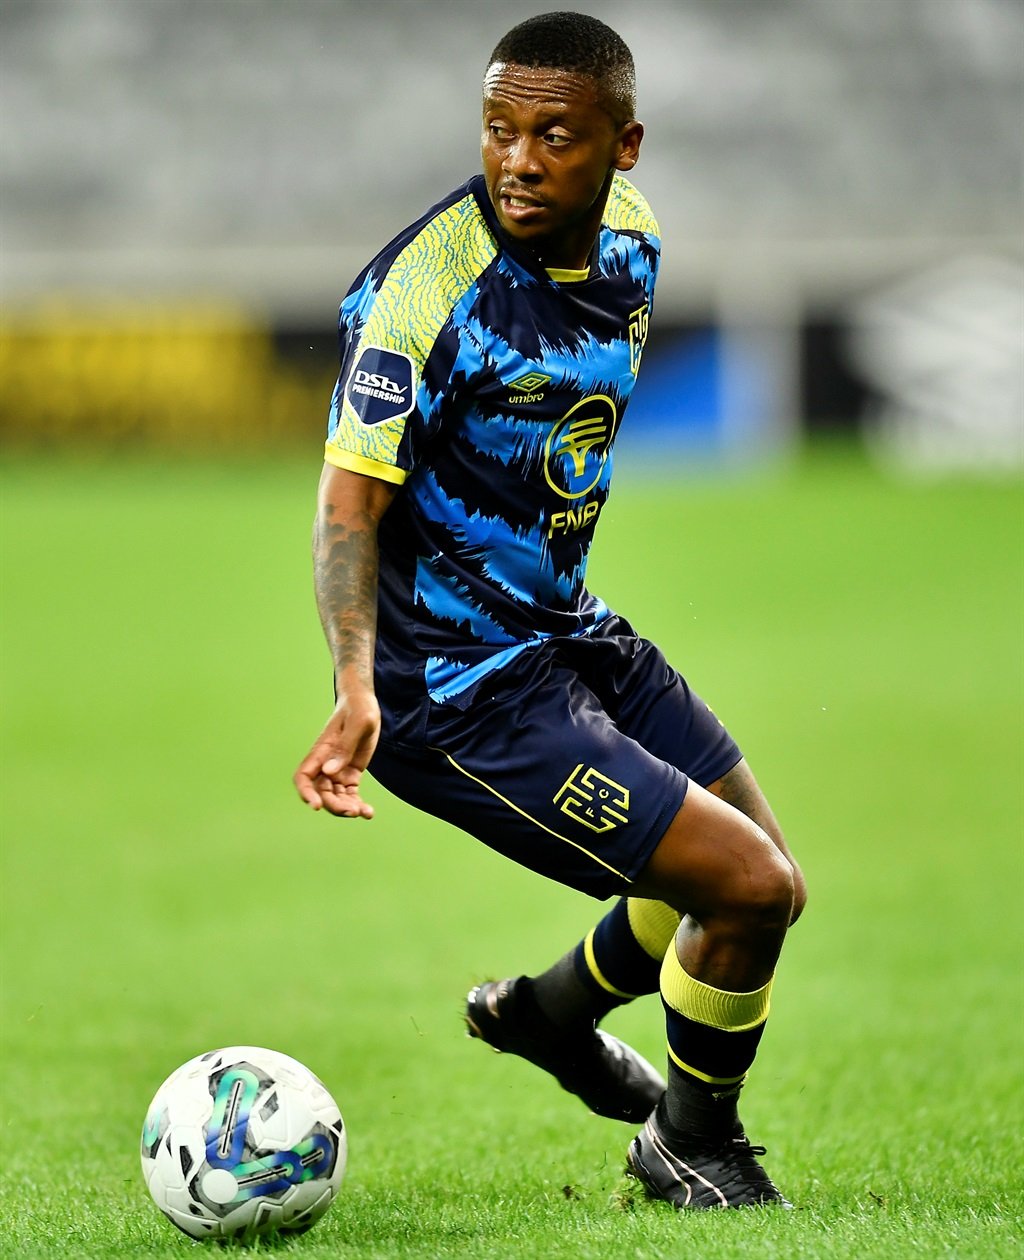 CAPE TOWN, SOUTH AFRICA - MARCH 05: Thabiso Kutumela of Cape Town City during the DStv Premiership match between Cape Town City FC and Stellenbosch FC at DHL Cape Town Stadium on March 05, 2024 in Cape Town, South Africa. (Photo by Ashley Vlotman/Gallo Images)